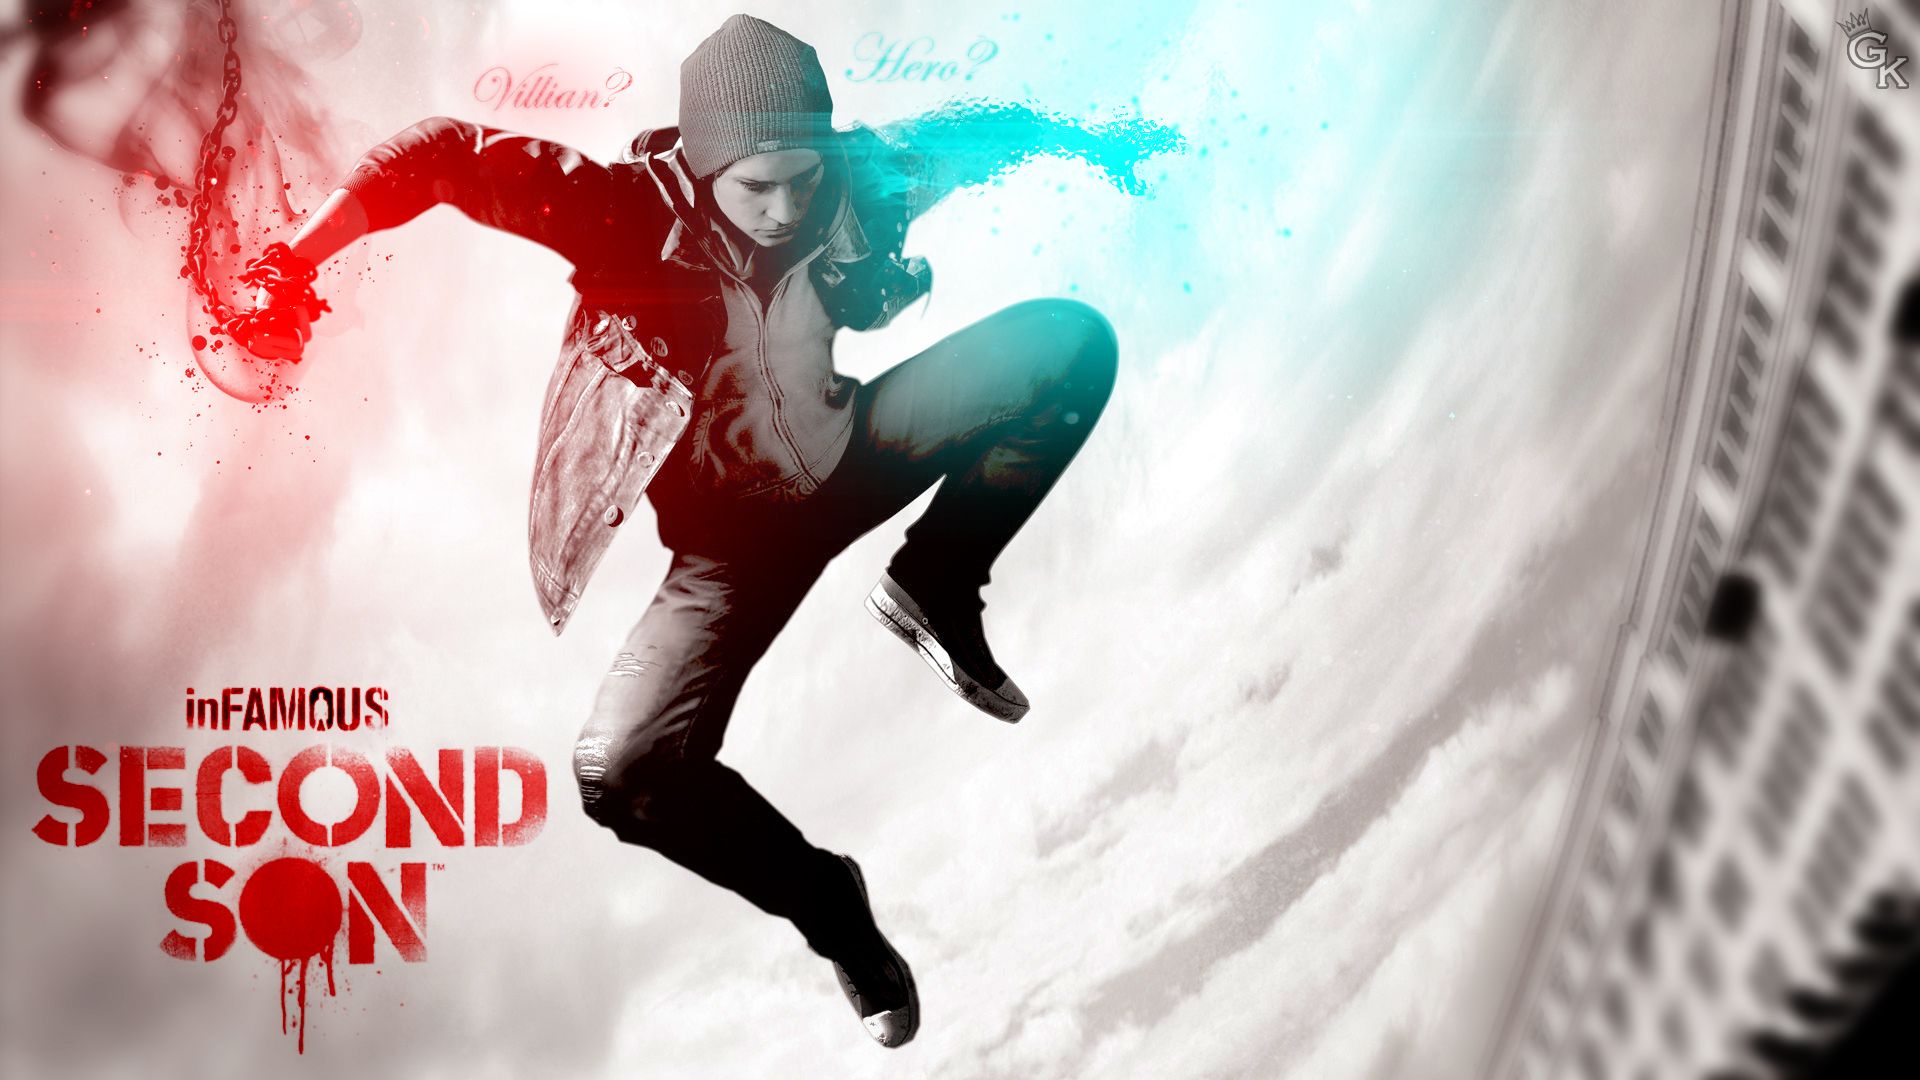 Second Son Hd Wallpaper - Infamous Second Son Poster Hd , HD Wallpaper & Backgrounds